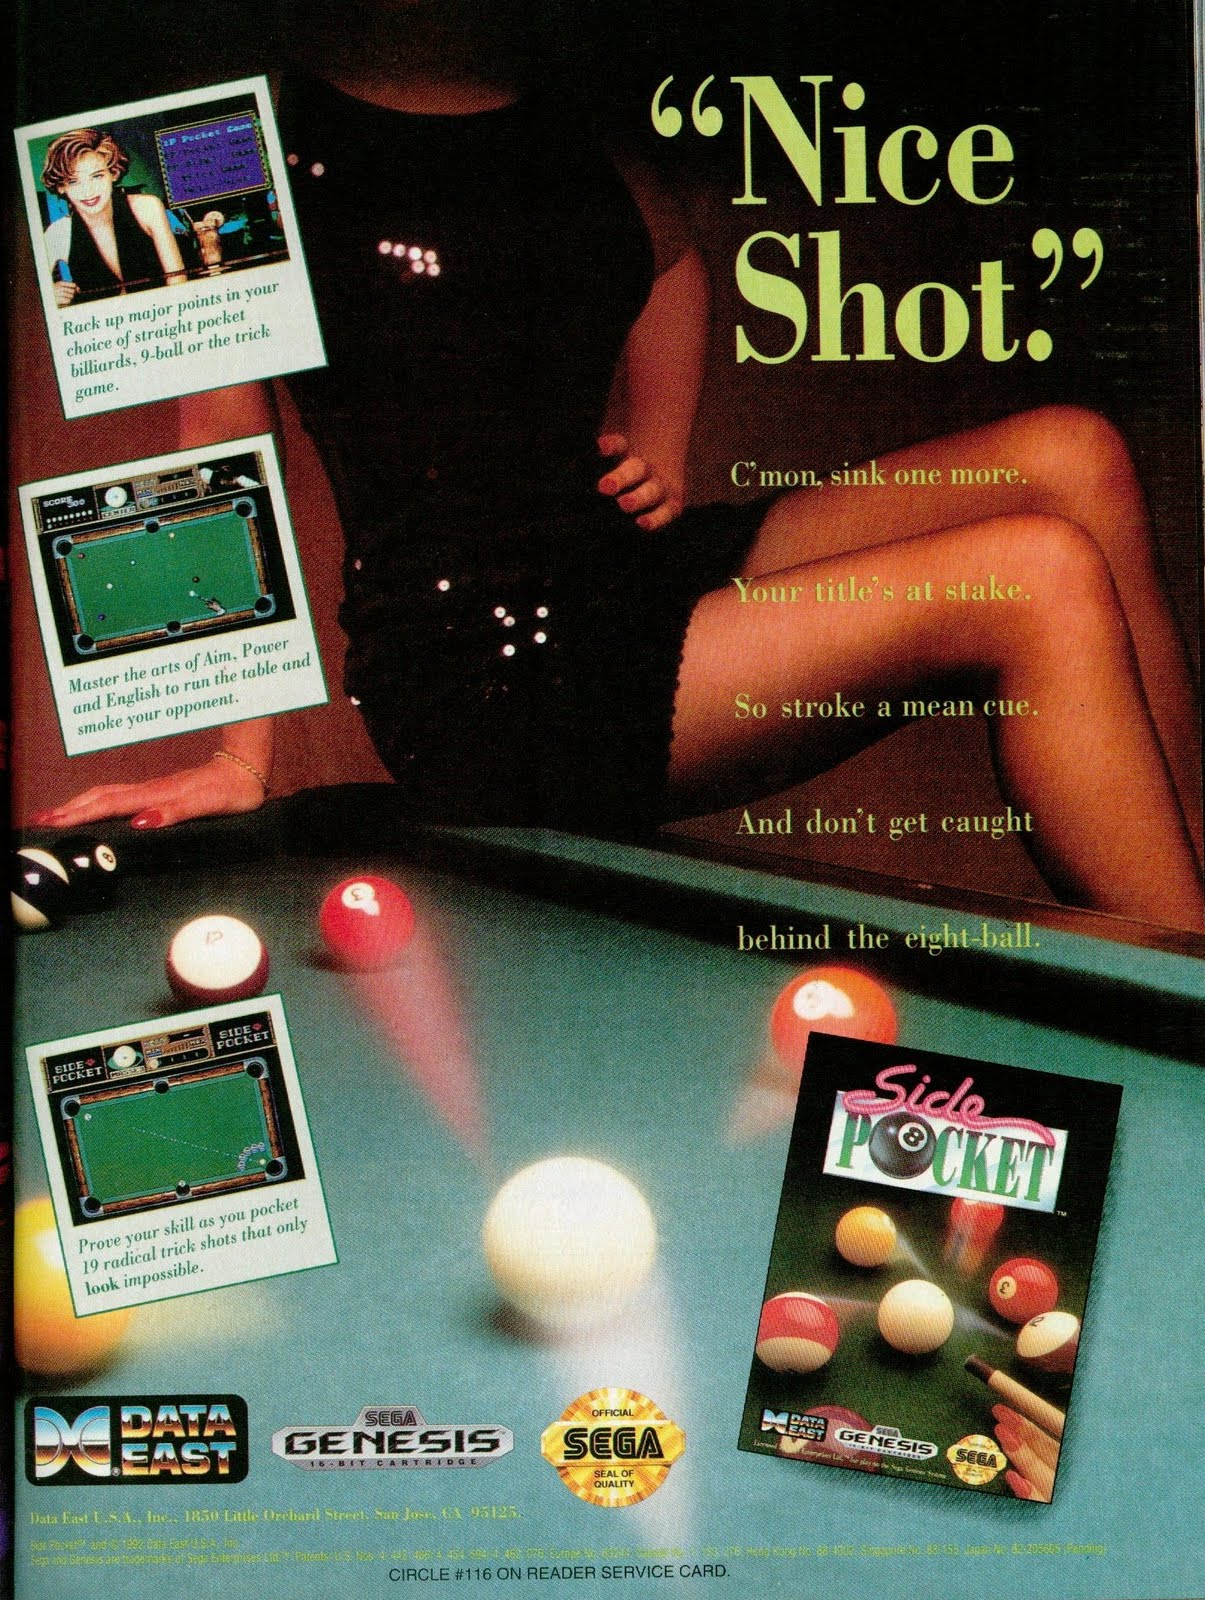 vintage gaming ads - side pocket sega genesis - 6Nice Shot?? Cmor, sink onere Your tout la So stroke a mean one And don't get caught behind the eight buil Pocket Mbao Genesis Setta